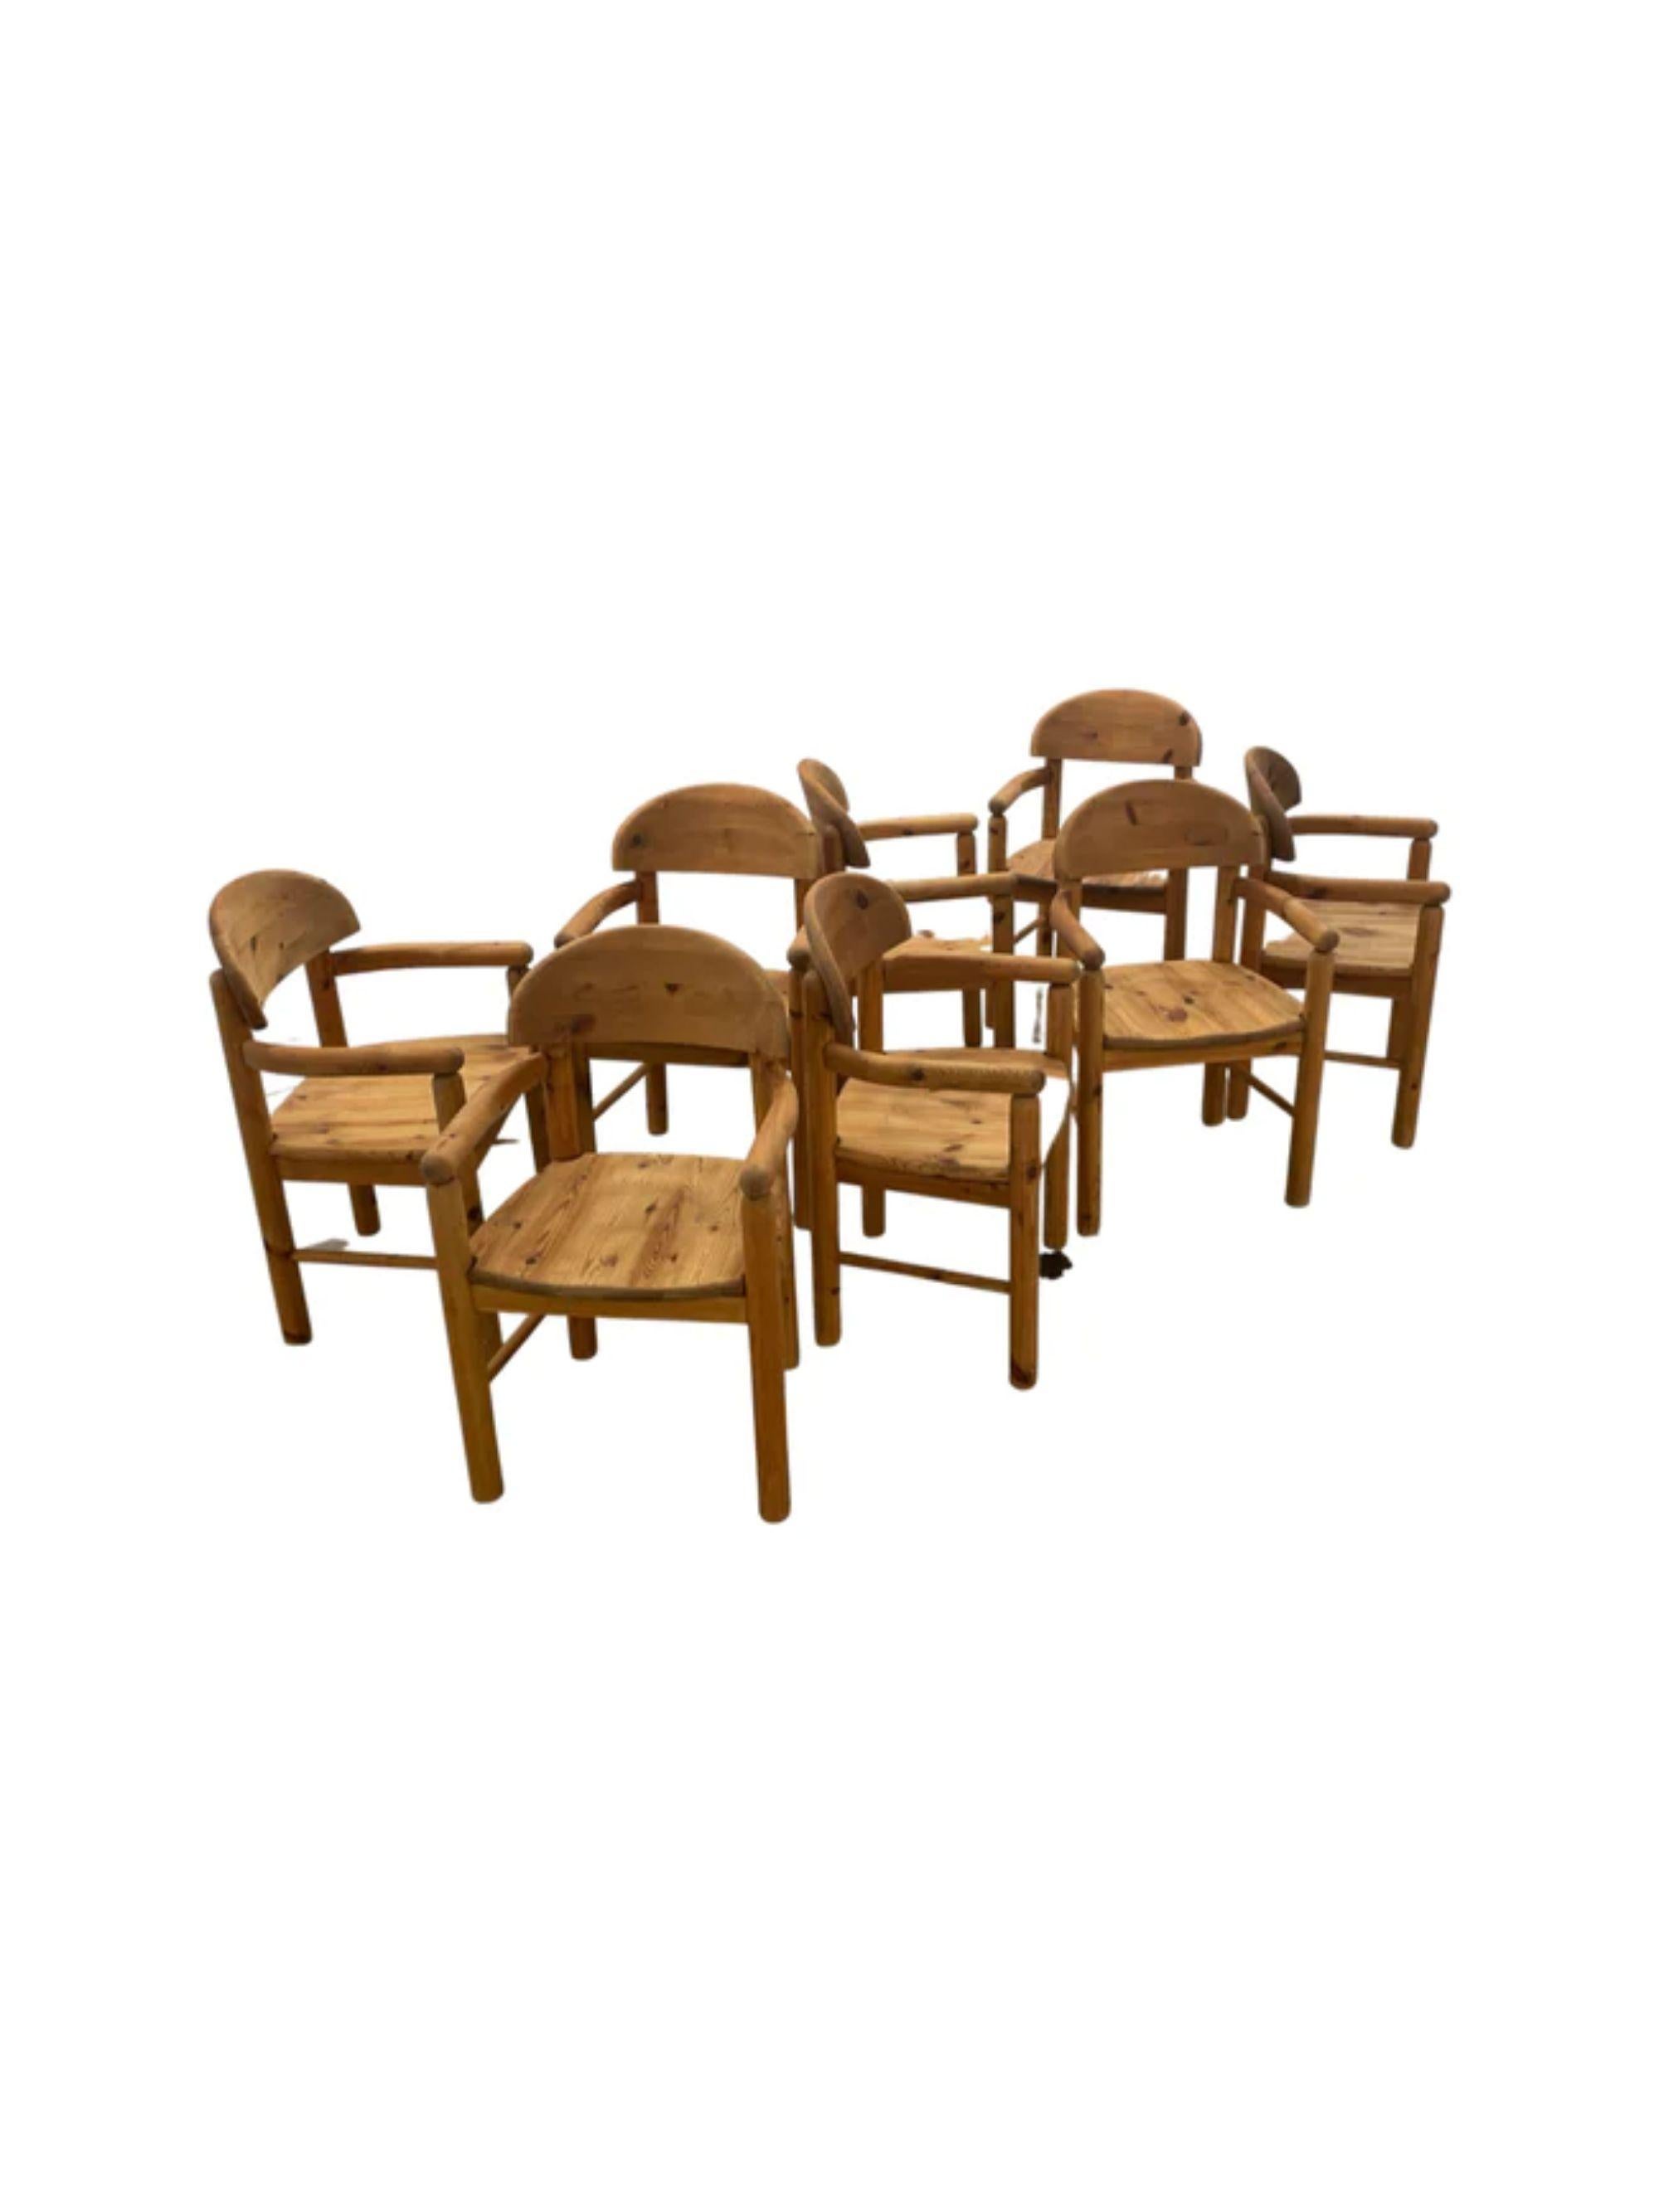 Rainer Daumiller rare set of eight dining armchairs for Hirtschals Sawmill, Denmark, 1970

Additional Information:
Materials: Solid pine
Dimensions: 34 1/2” H x 21. 1/2” W x 19” D
Condition: Excellent. Ready for use.